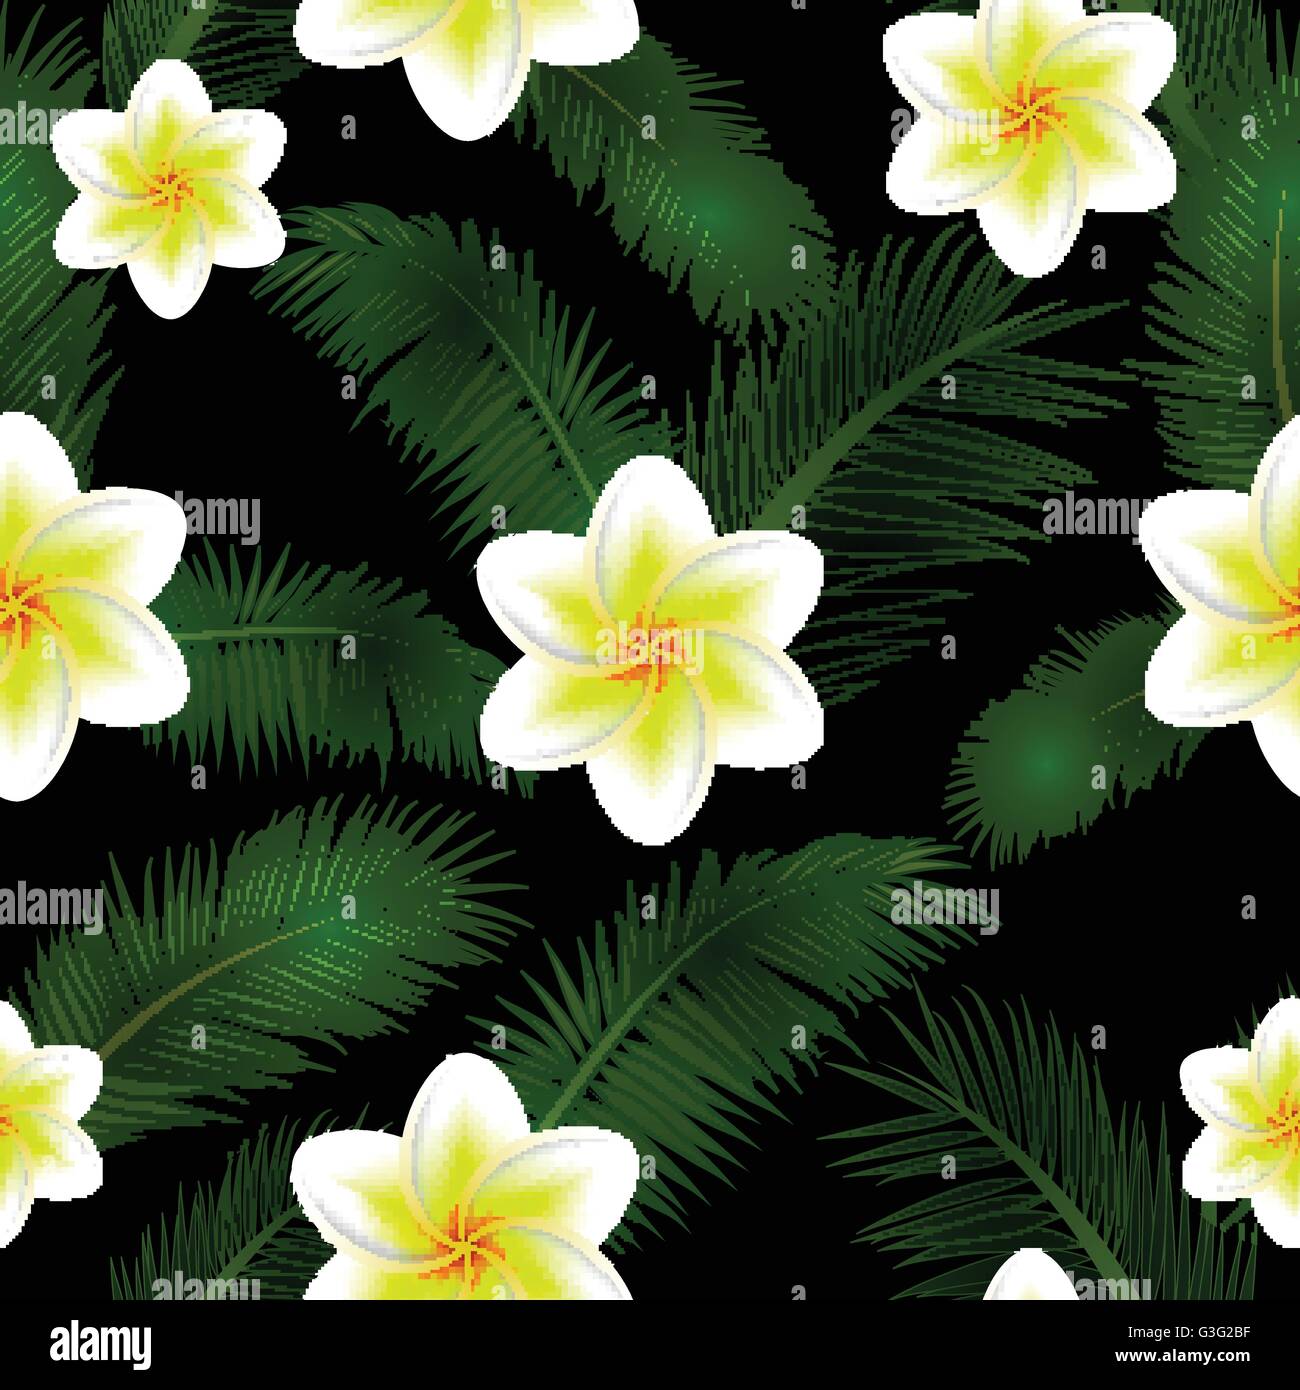 Vector Illustration of floral seamless pattern Stock Vector